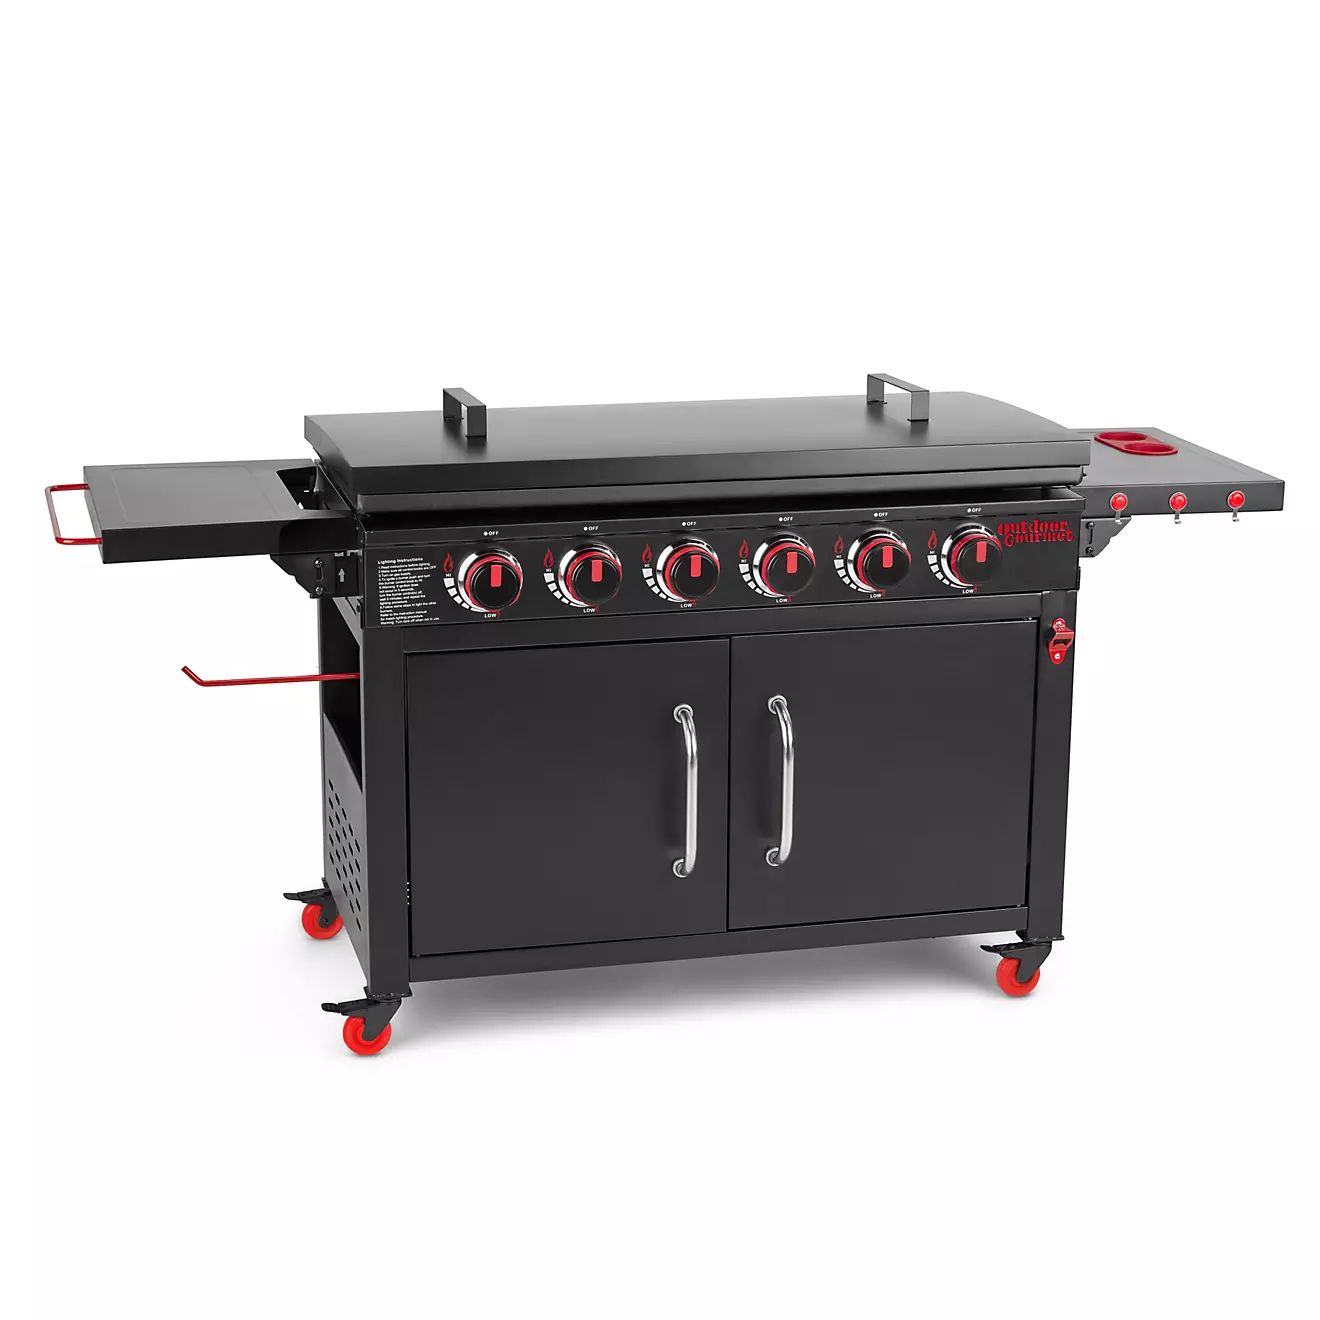 Outdoor Gourmet 6-Burner 44 in Griddle | Academy Sports + Outdoors